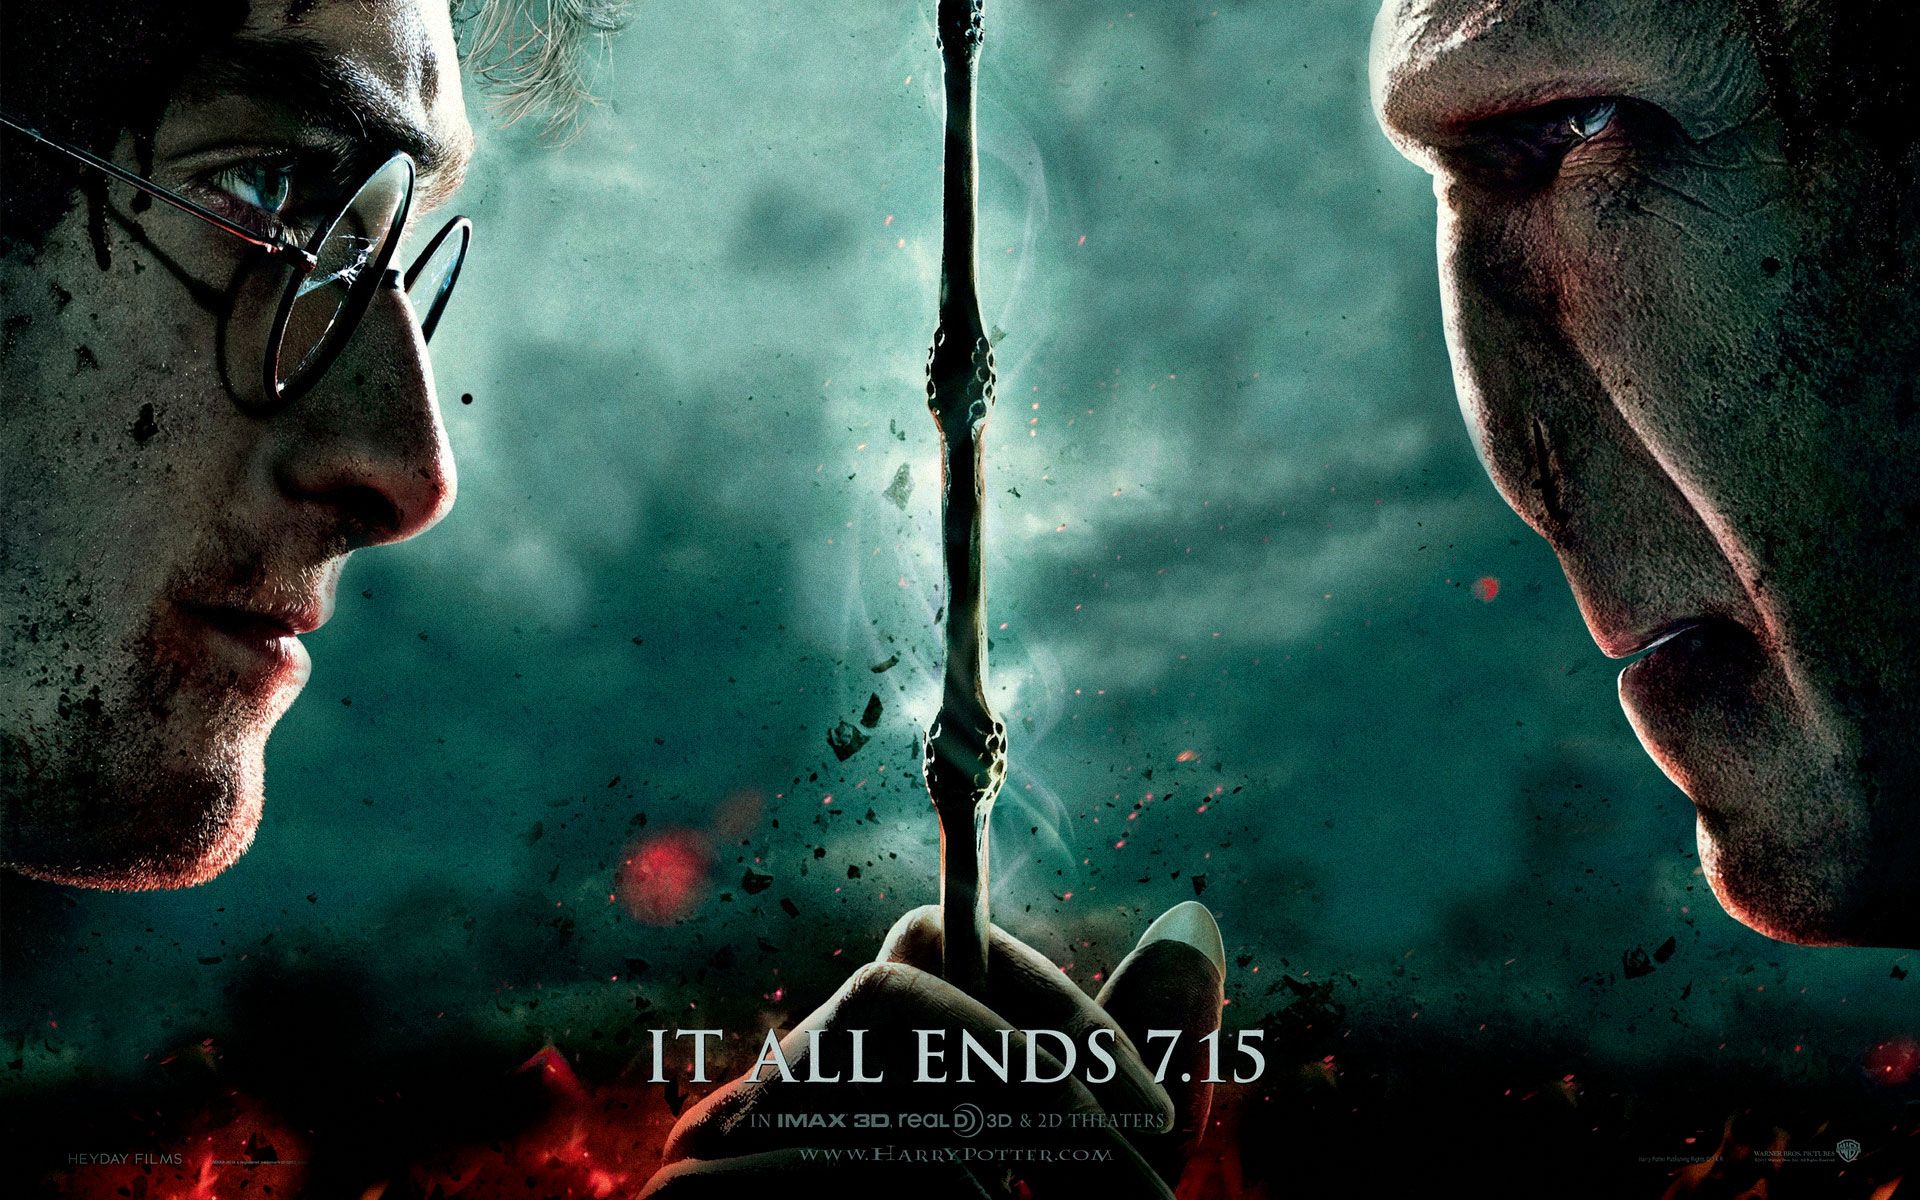 Download Harry Potter And The Deathly Hallows Wallpaper Free ...